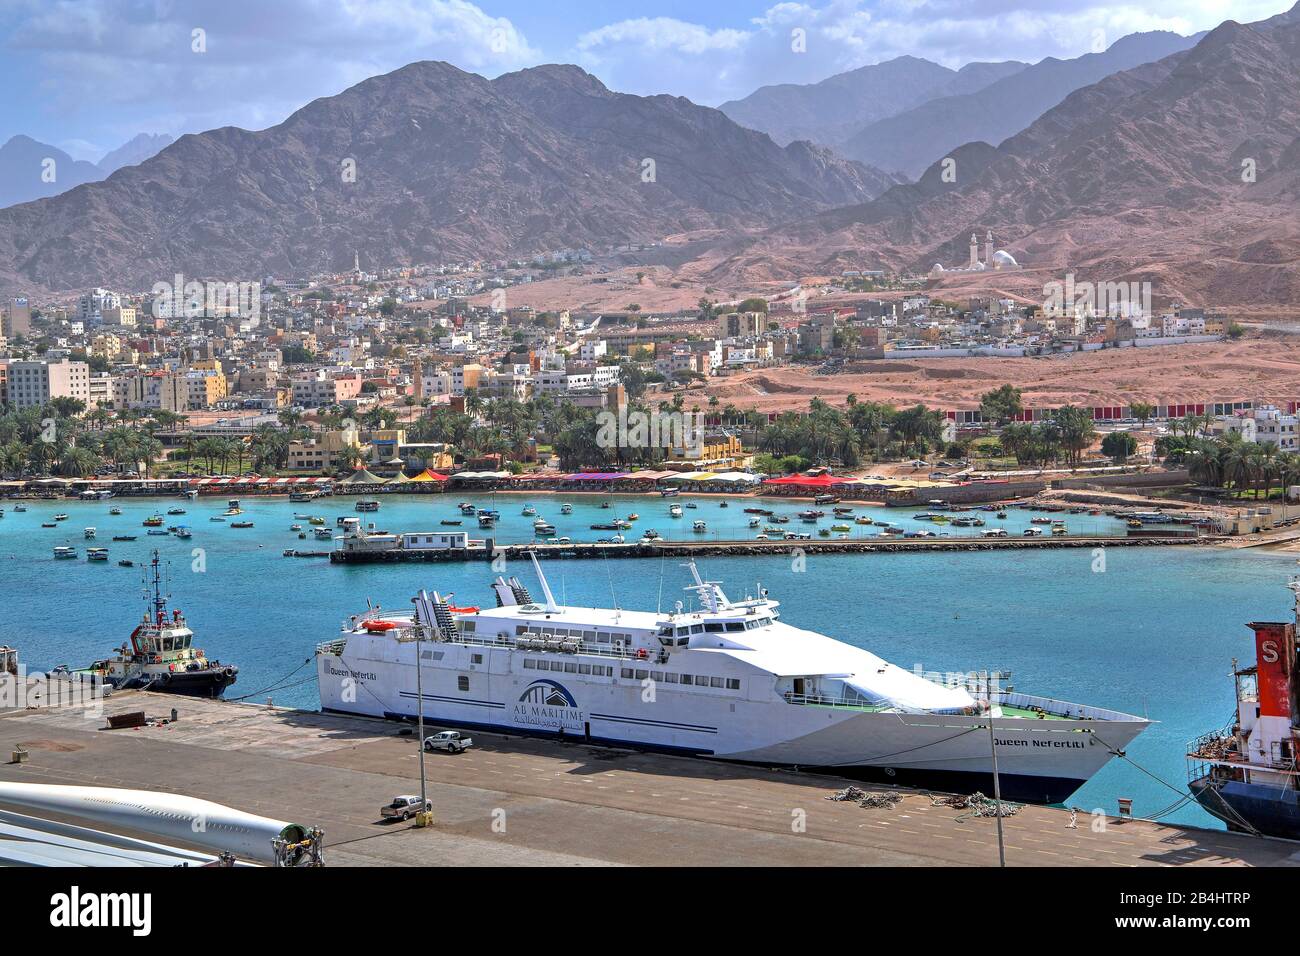 Ferry in the harbor against the city with water front and mountains. Akaba Aqaba, Gulf of Aqaba, Red Sea, Jordan Stock Photo